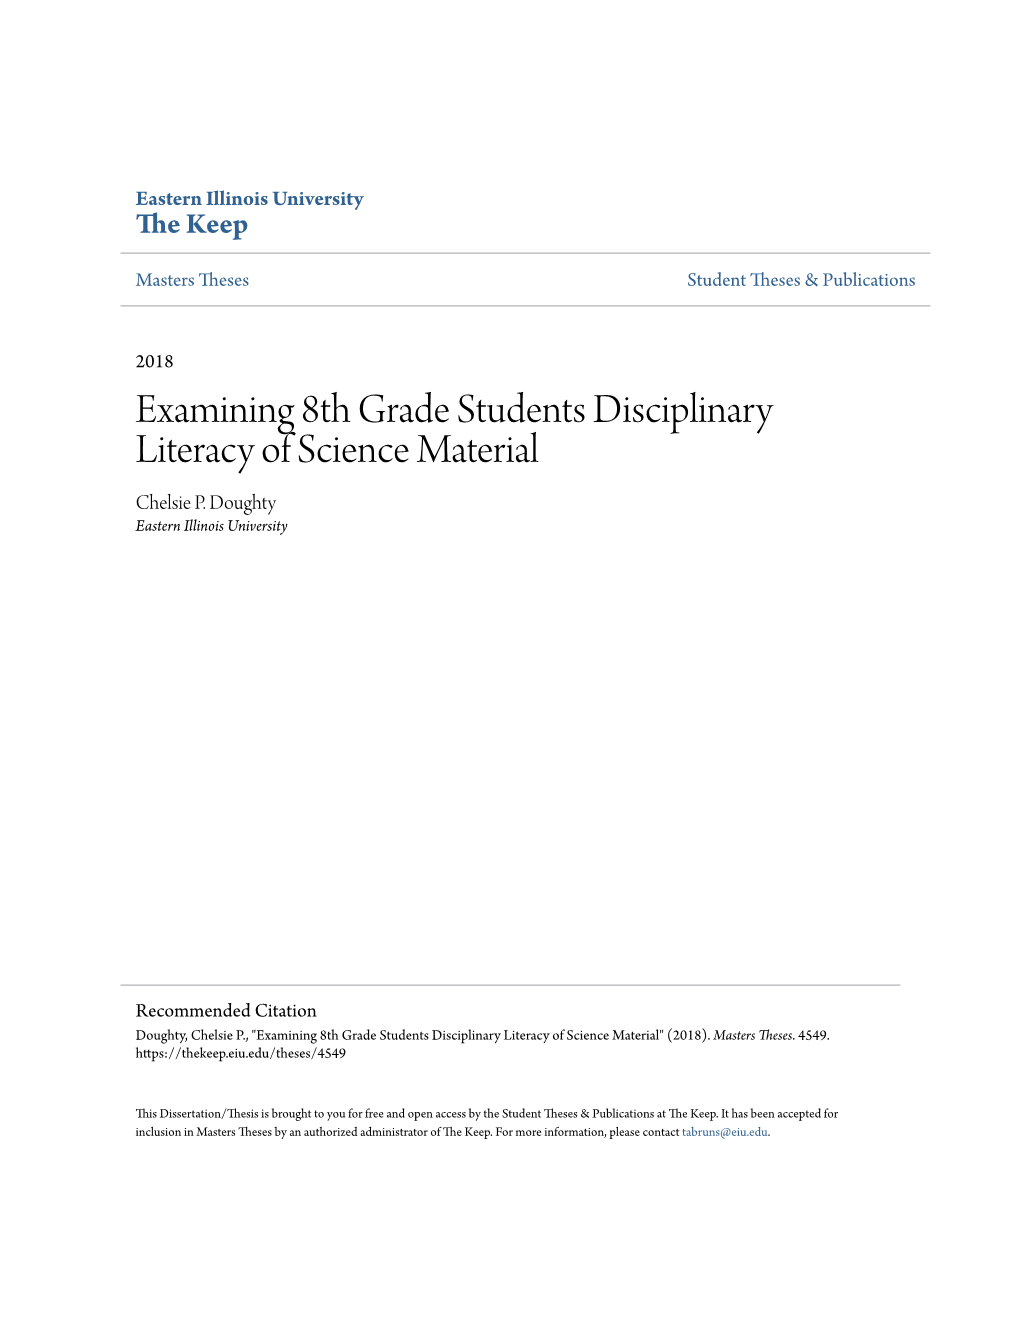 Examining 8Th Grade Students Disciplinary Literacy of Science Material Chelsie P